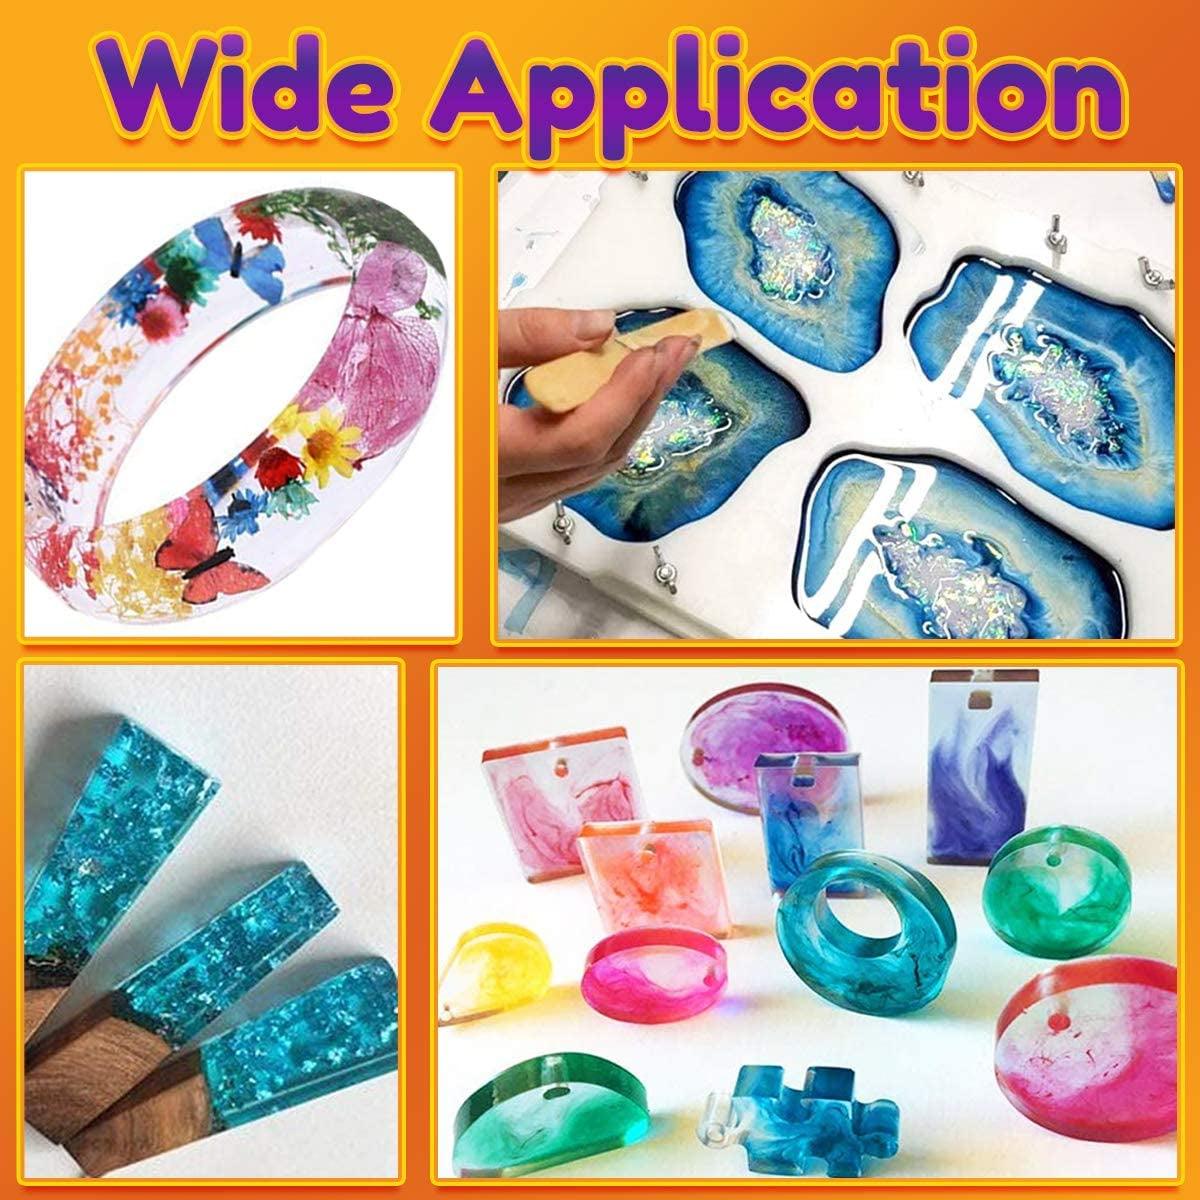 Resin Molds Kit, UV Epoxy Resin Supplies for Beginners Tools Set with  Silicone Molds, DIY Pendant Charms, Glitters, Dried Flowers, Foil Flakes  for Jewelry Making Arts Crafts Kit, Instruction Included